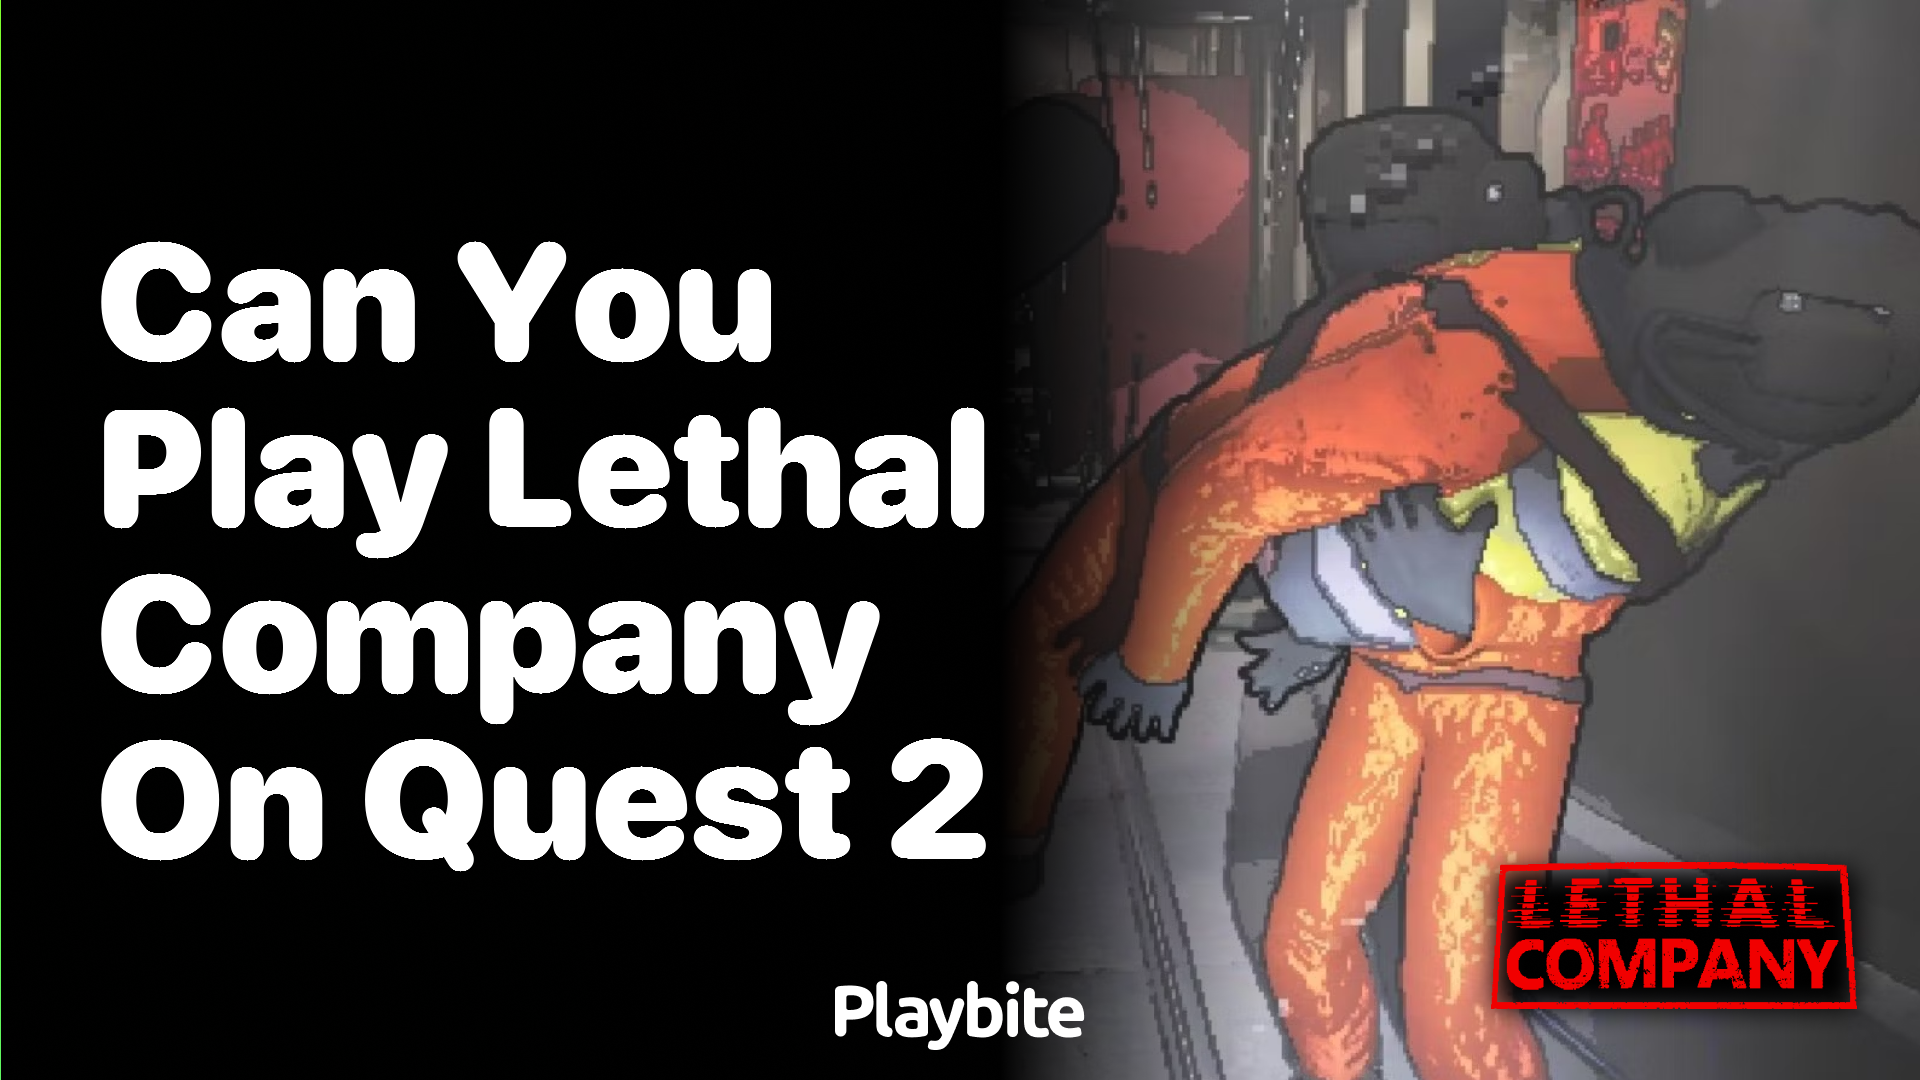 Can you play Lethal Company on Quest 2?